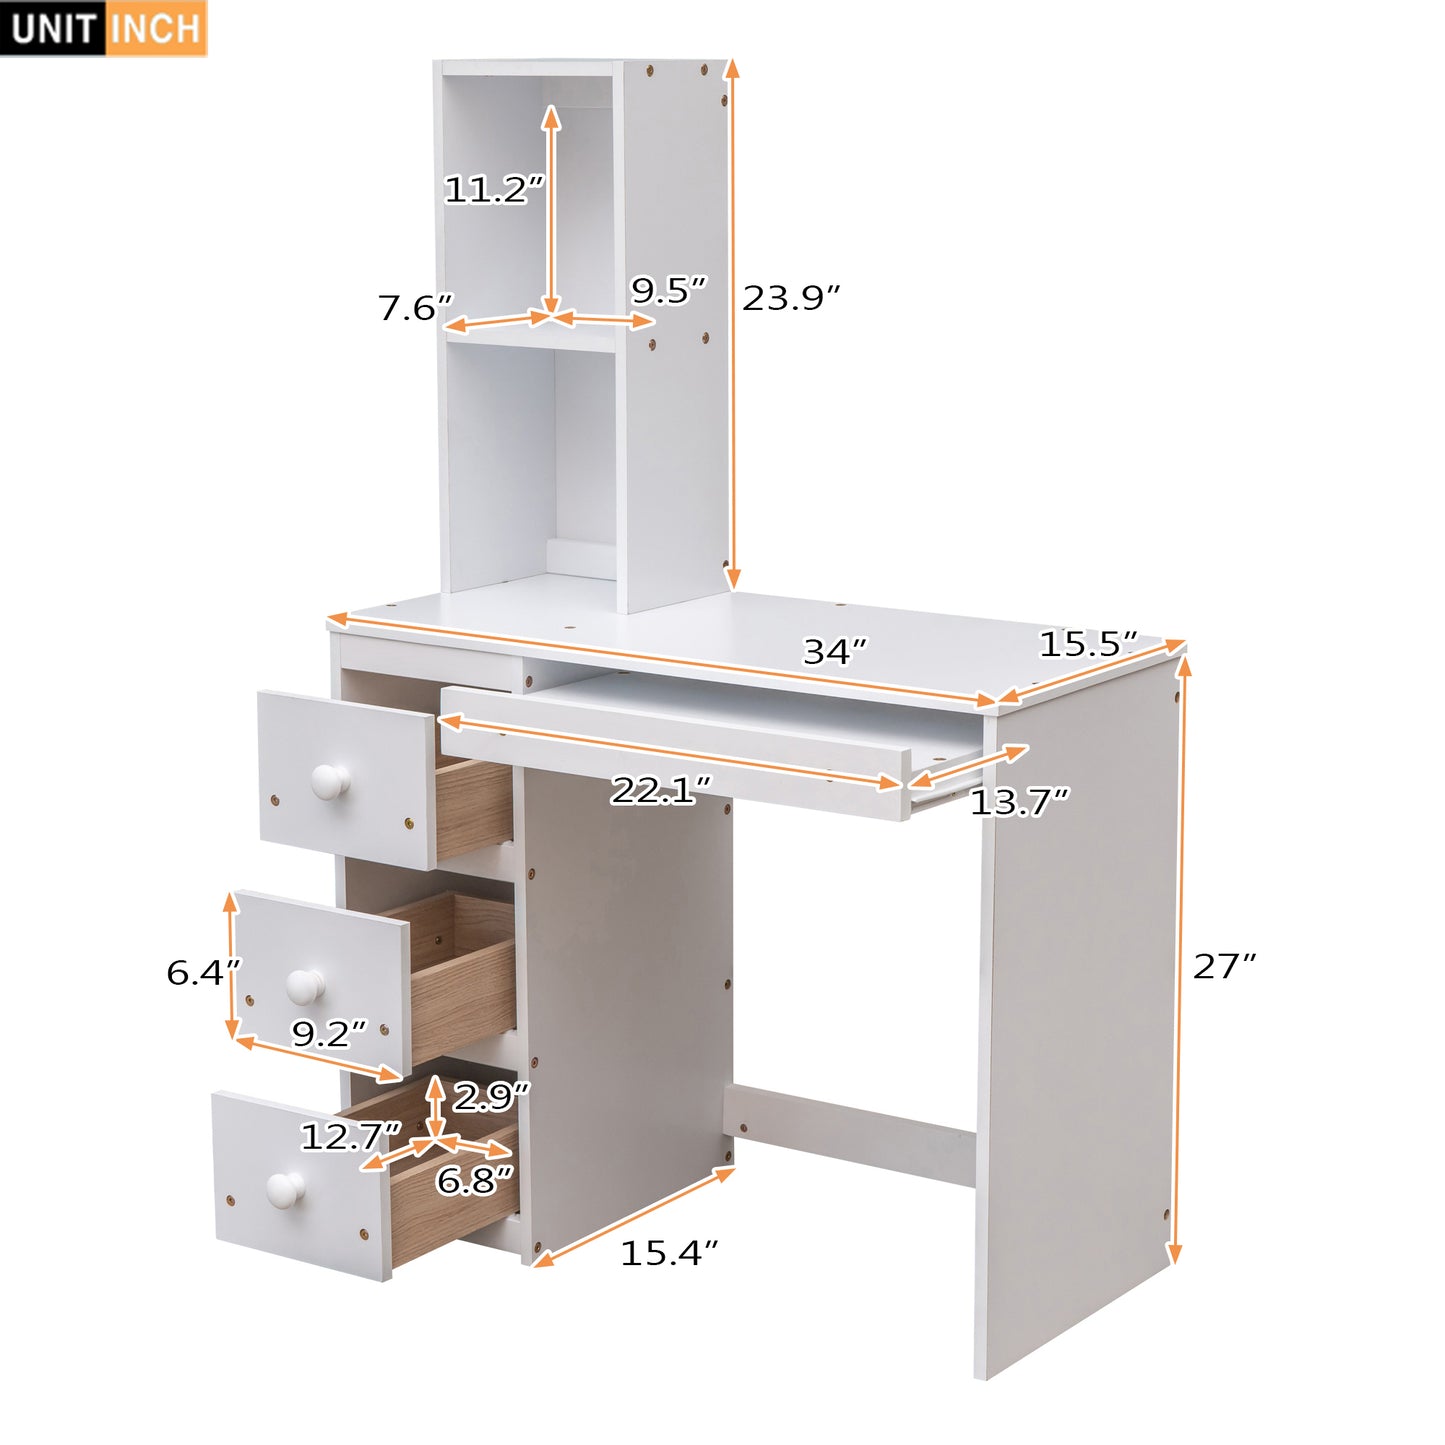 Twin Size Loft Bed with a Stand-alone Bed, Storage Staircase, Desk, Shelves and Drawers, White